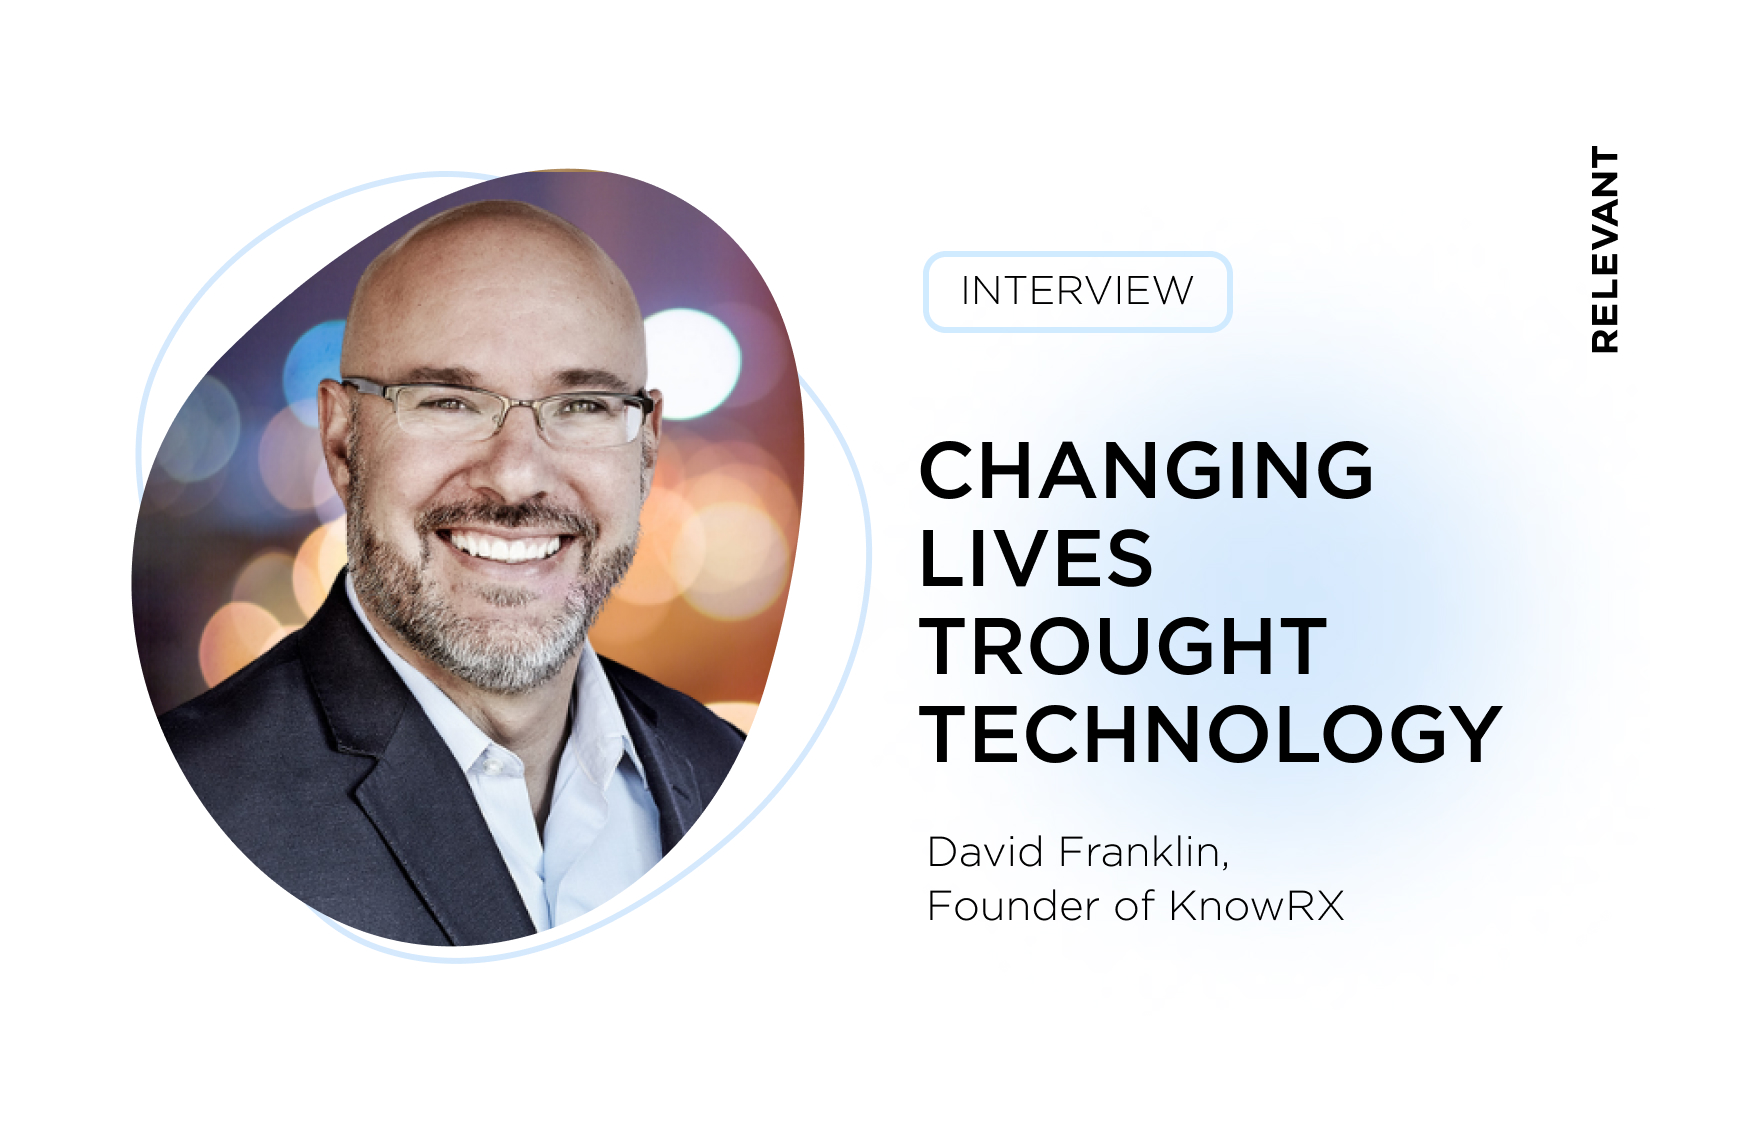 KnowRX Founder David Franklin Explains How His Company Is Changing Lives Through Technology